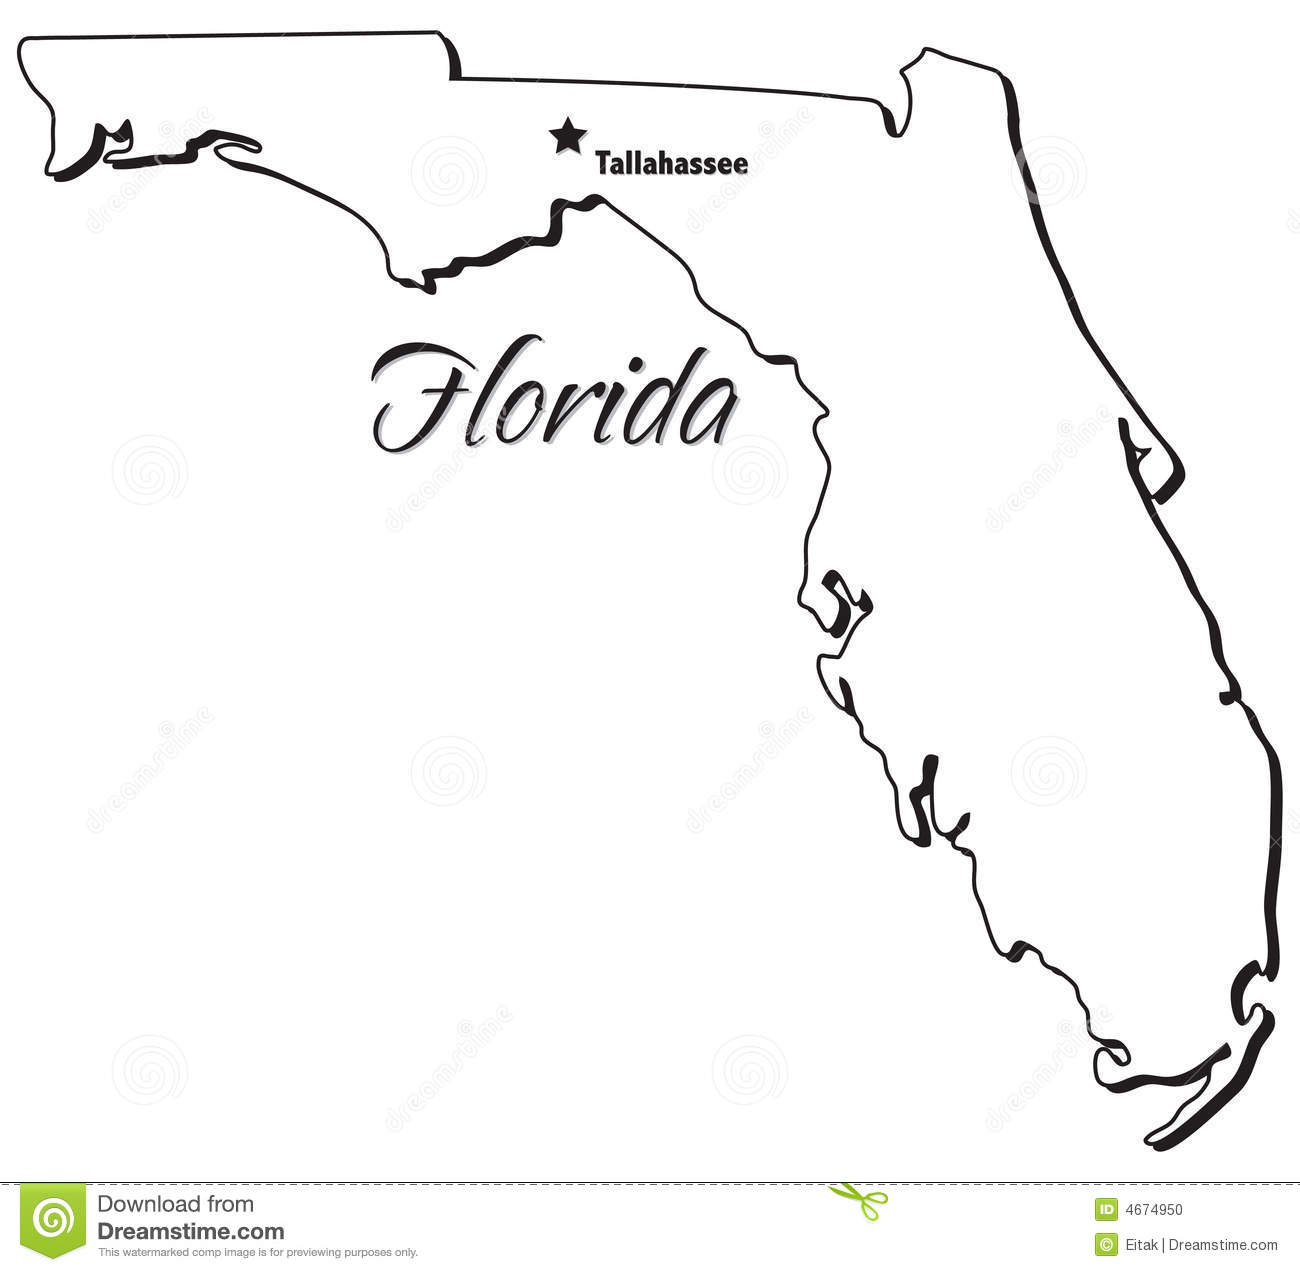 an-illustrated-map-of-florida-with-all-the-states-and-their-major